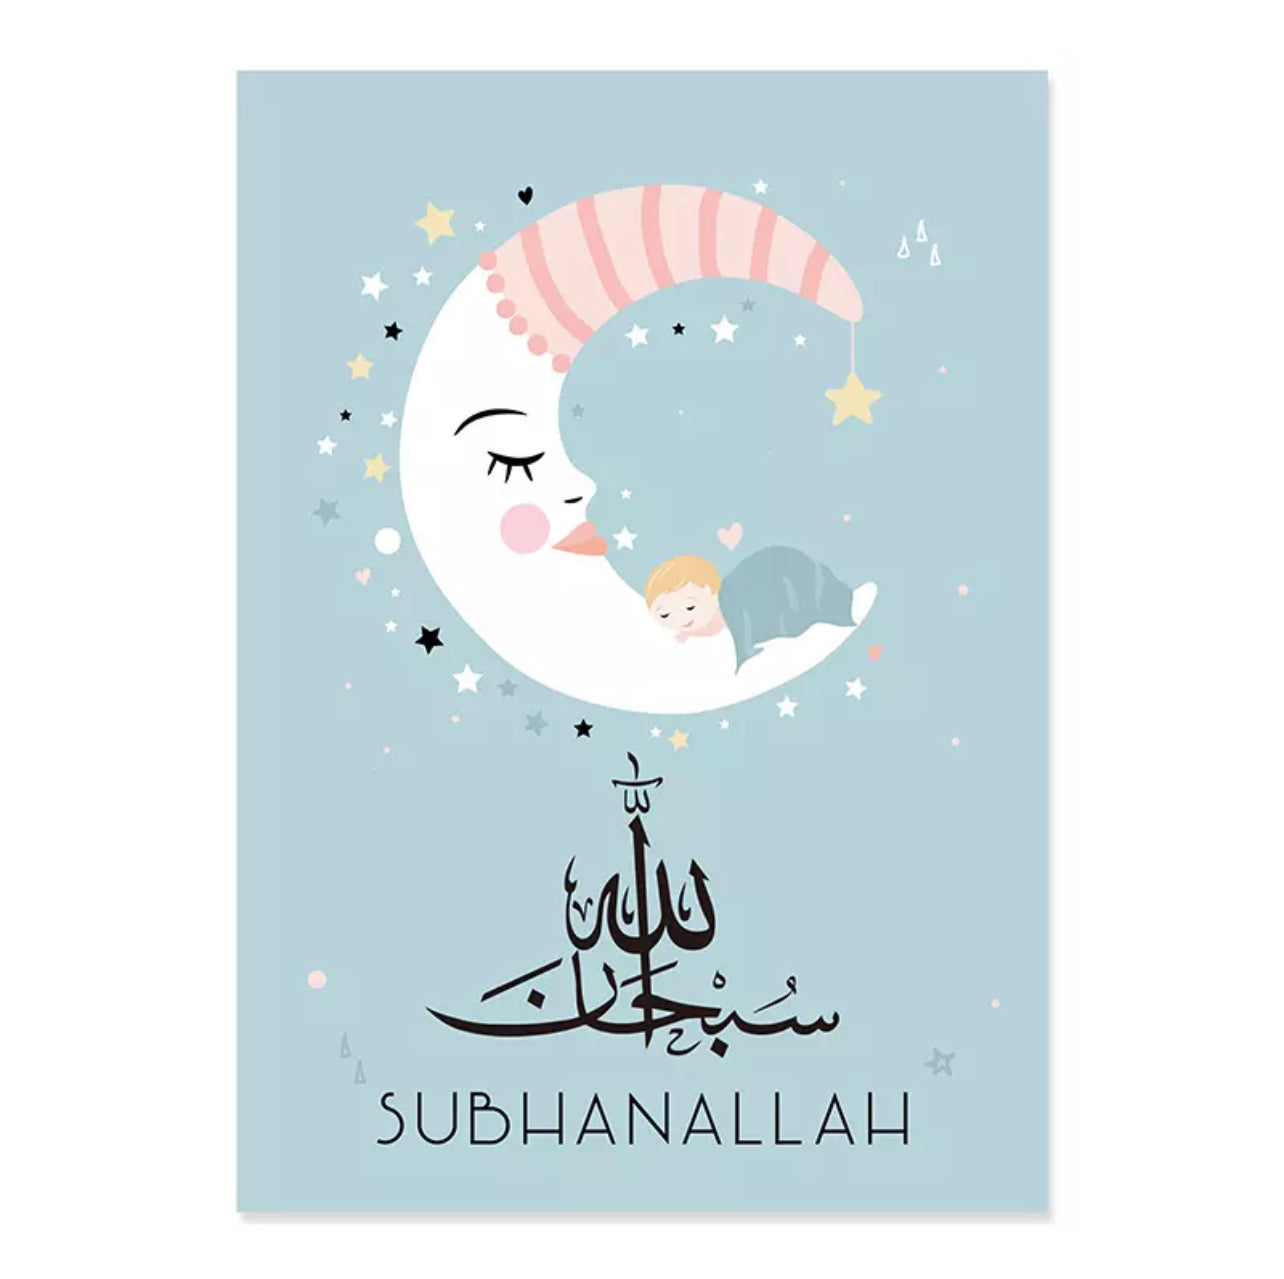 Blue And White Baby Cartoon For Nursery Room With Islamic Calligraphy